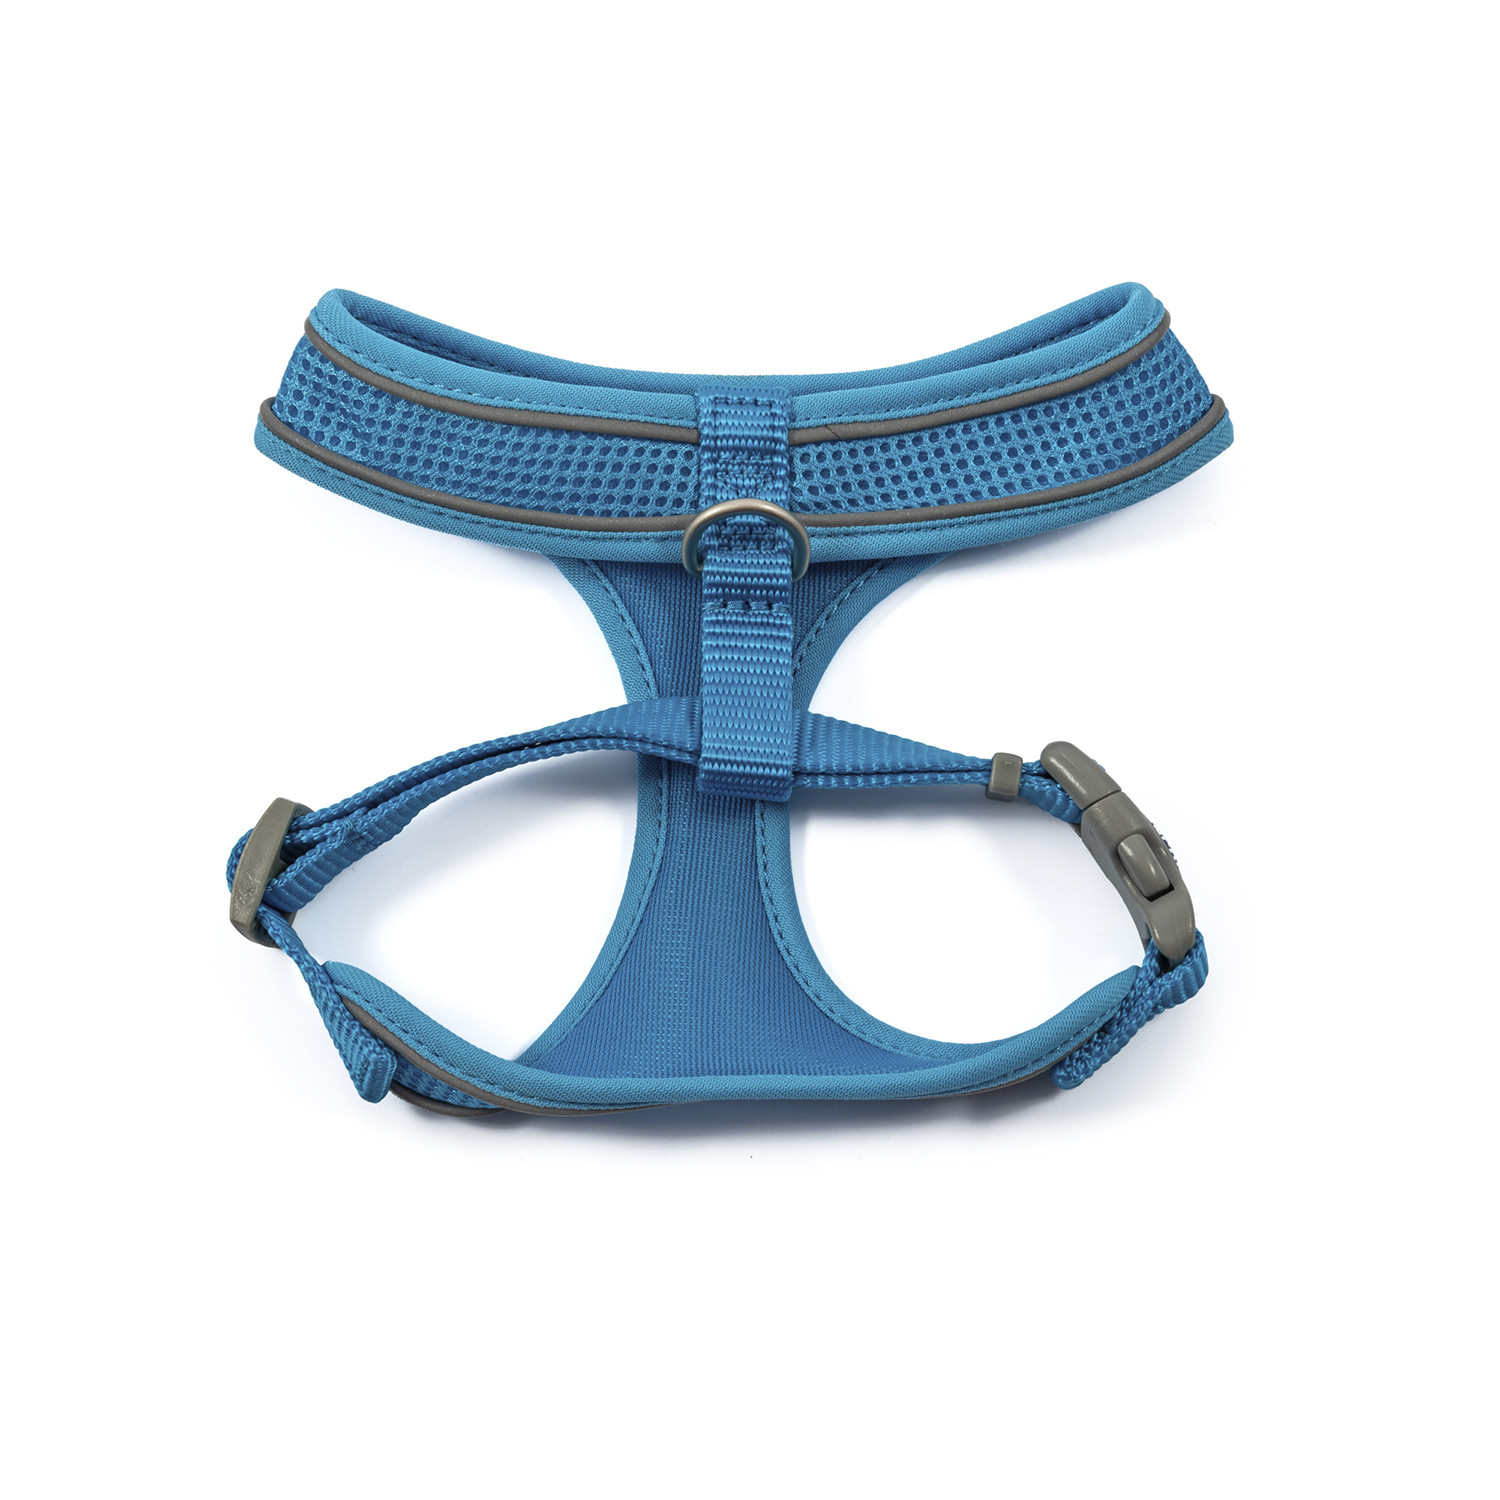 Mesh Dog Harness - Extra Small Image 2